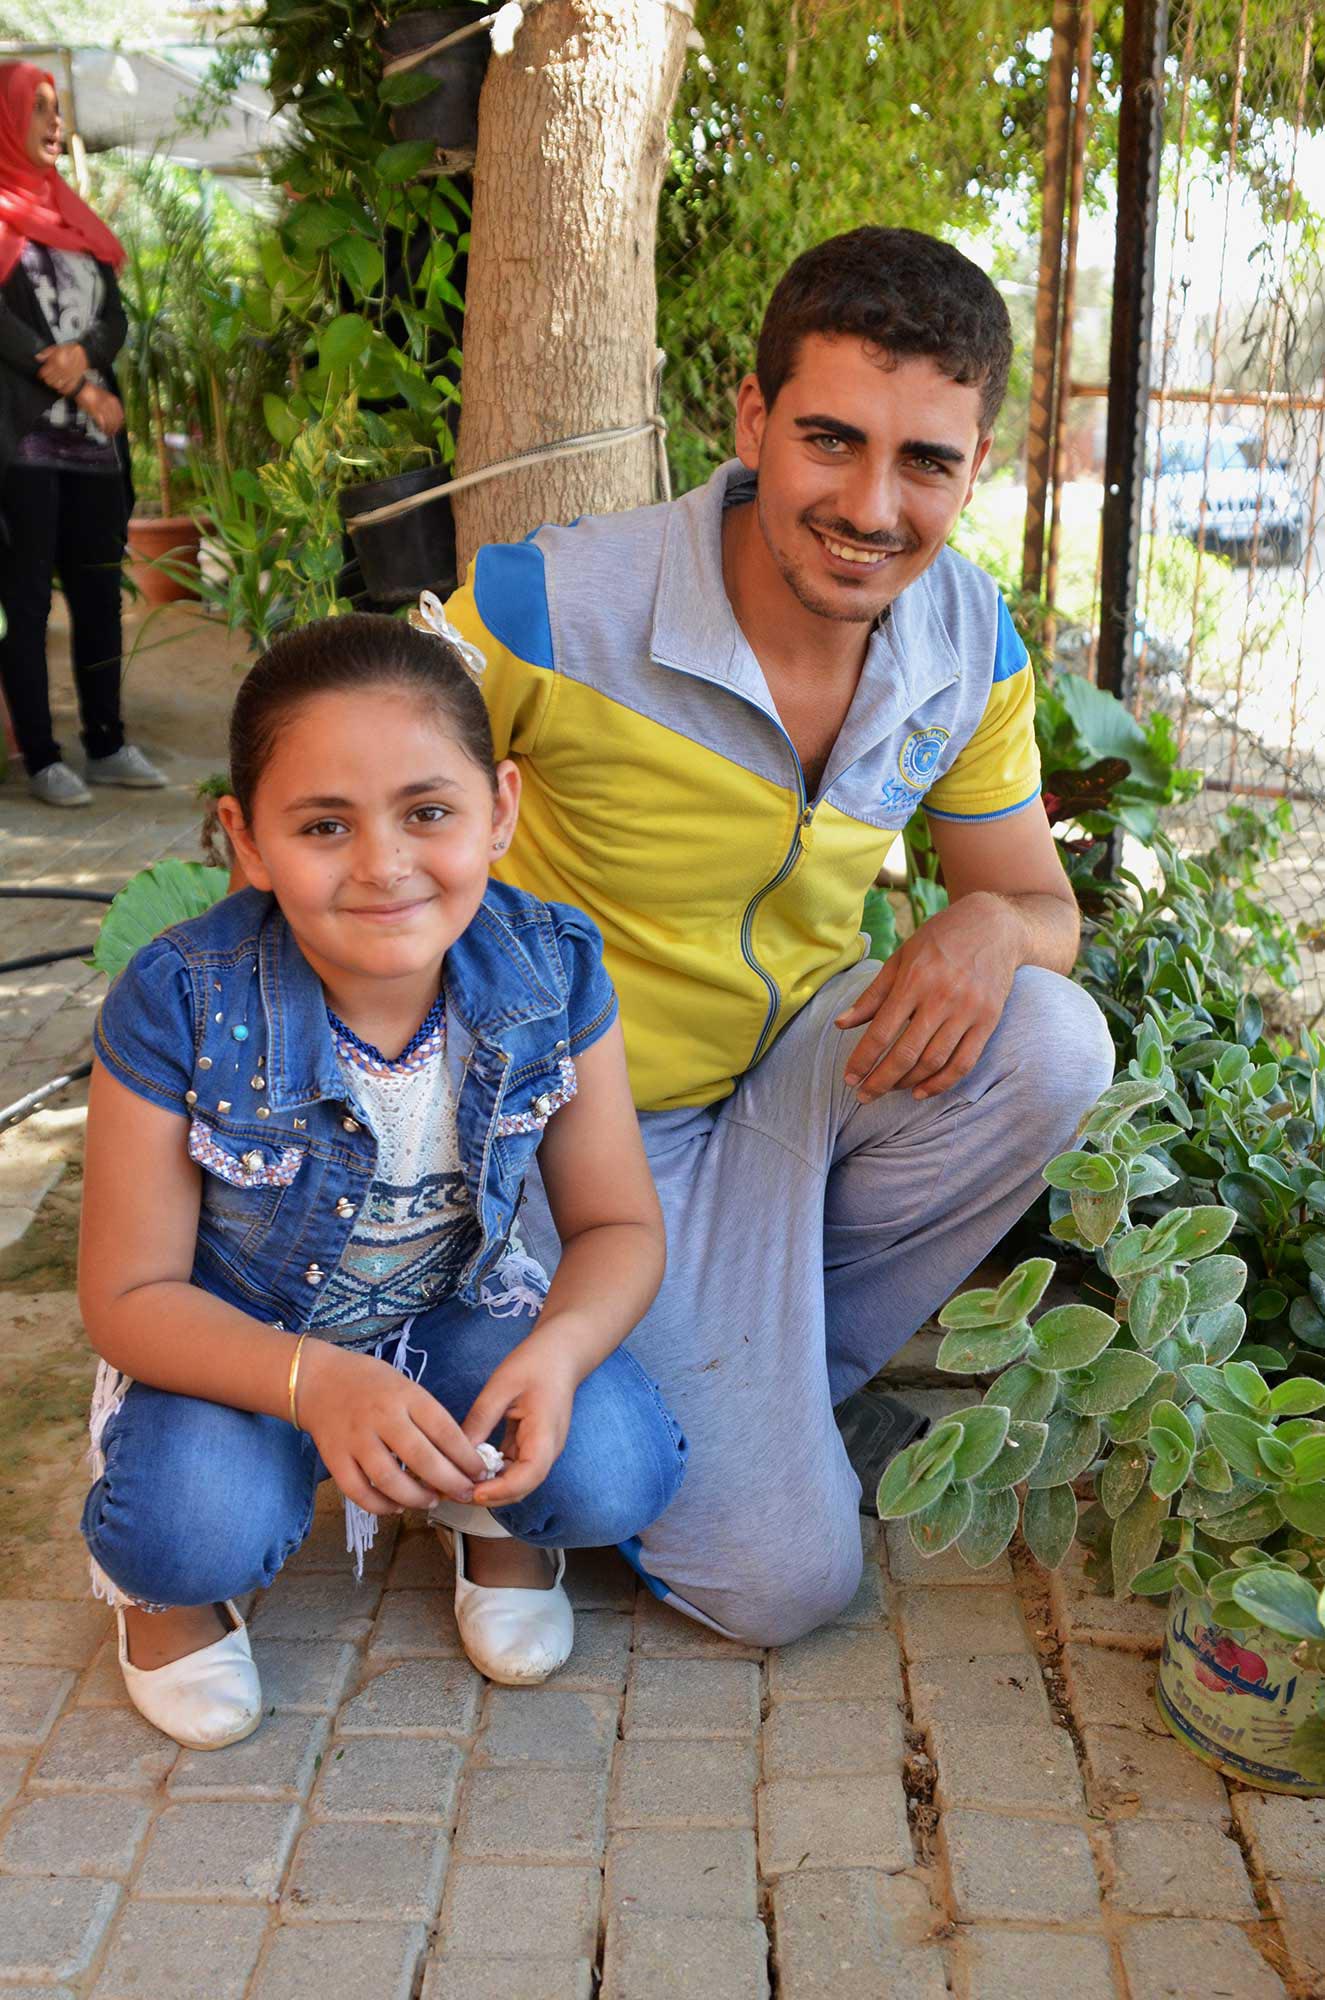 Saed loves to tend to his garden that grows with help from a water well.